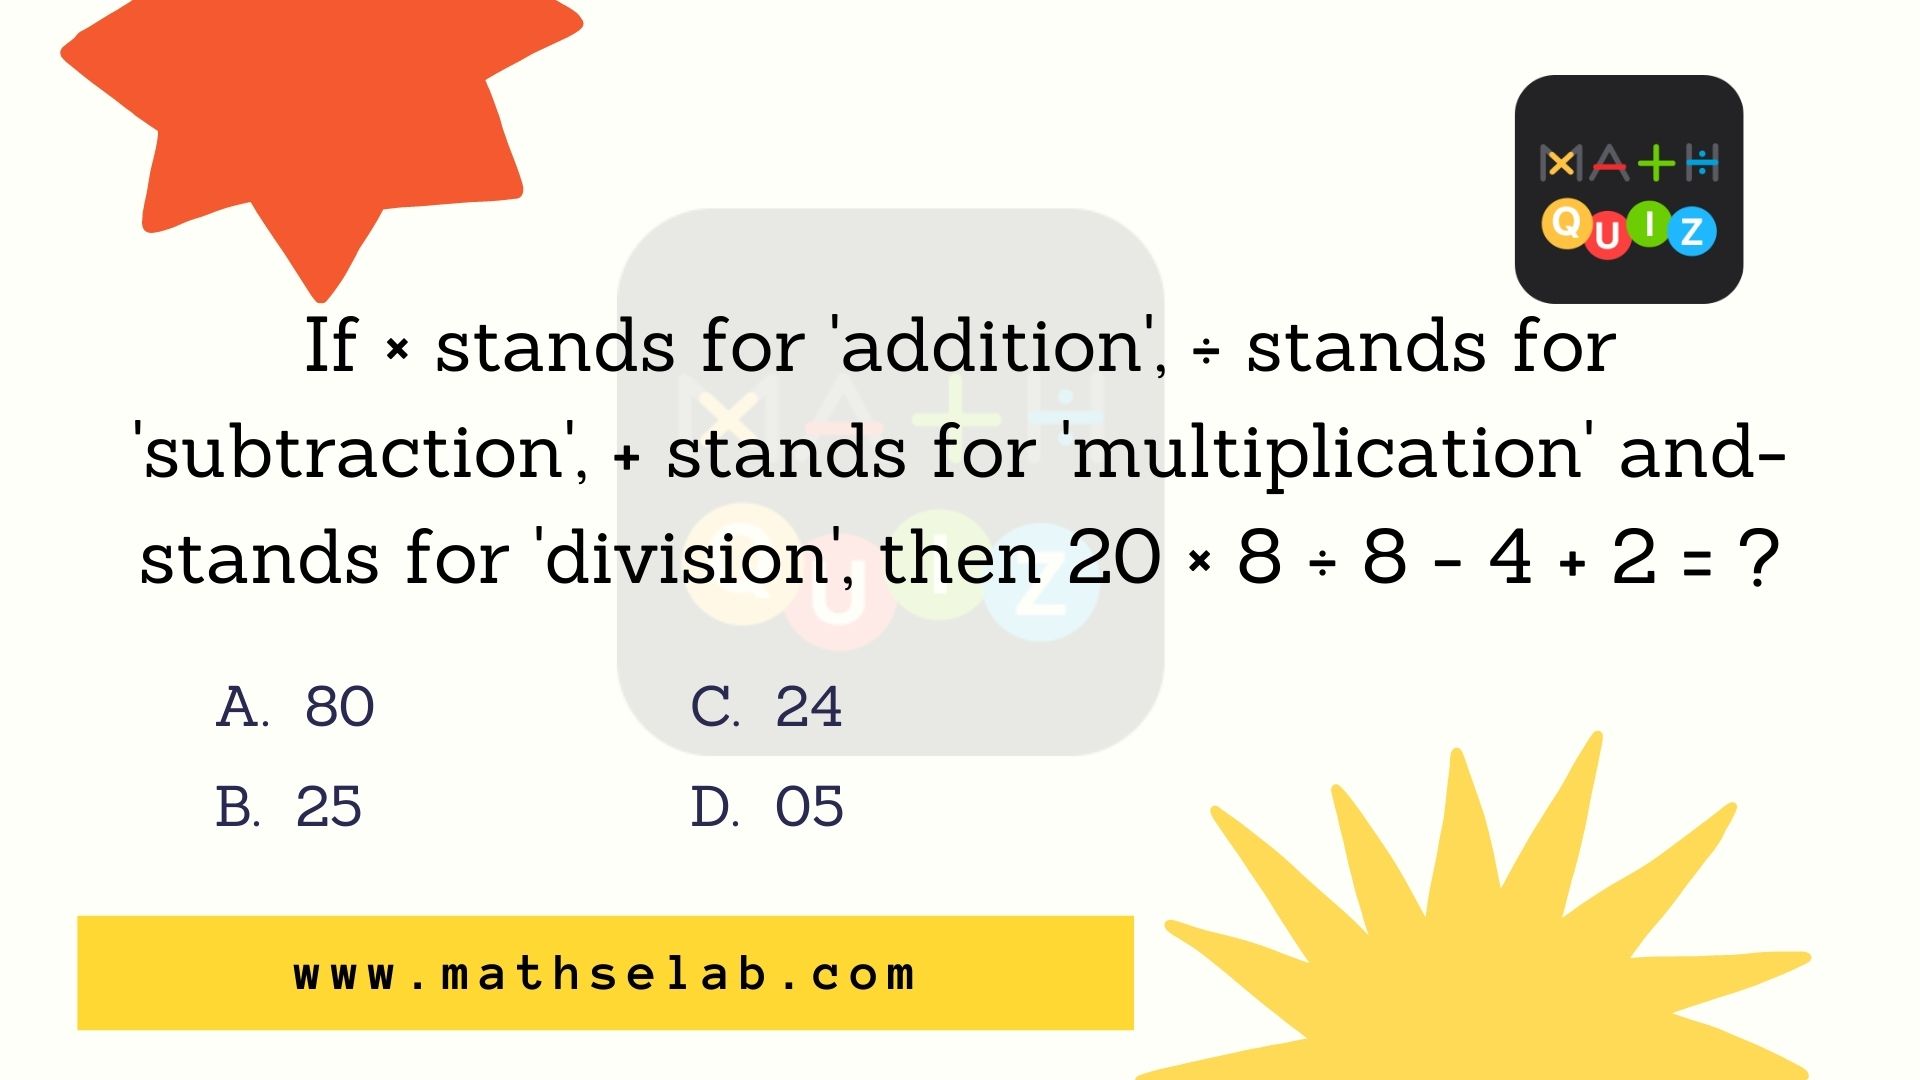 If × stands for 'addition', ÷ stands for 'subtraction', + stands for 'multiplication' and-stands for 'division', then 20 × 8 ÷ 8 - 4 + 2 = ? - mathselab.com